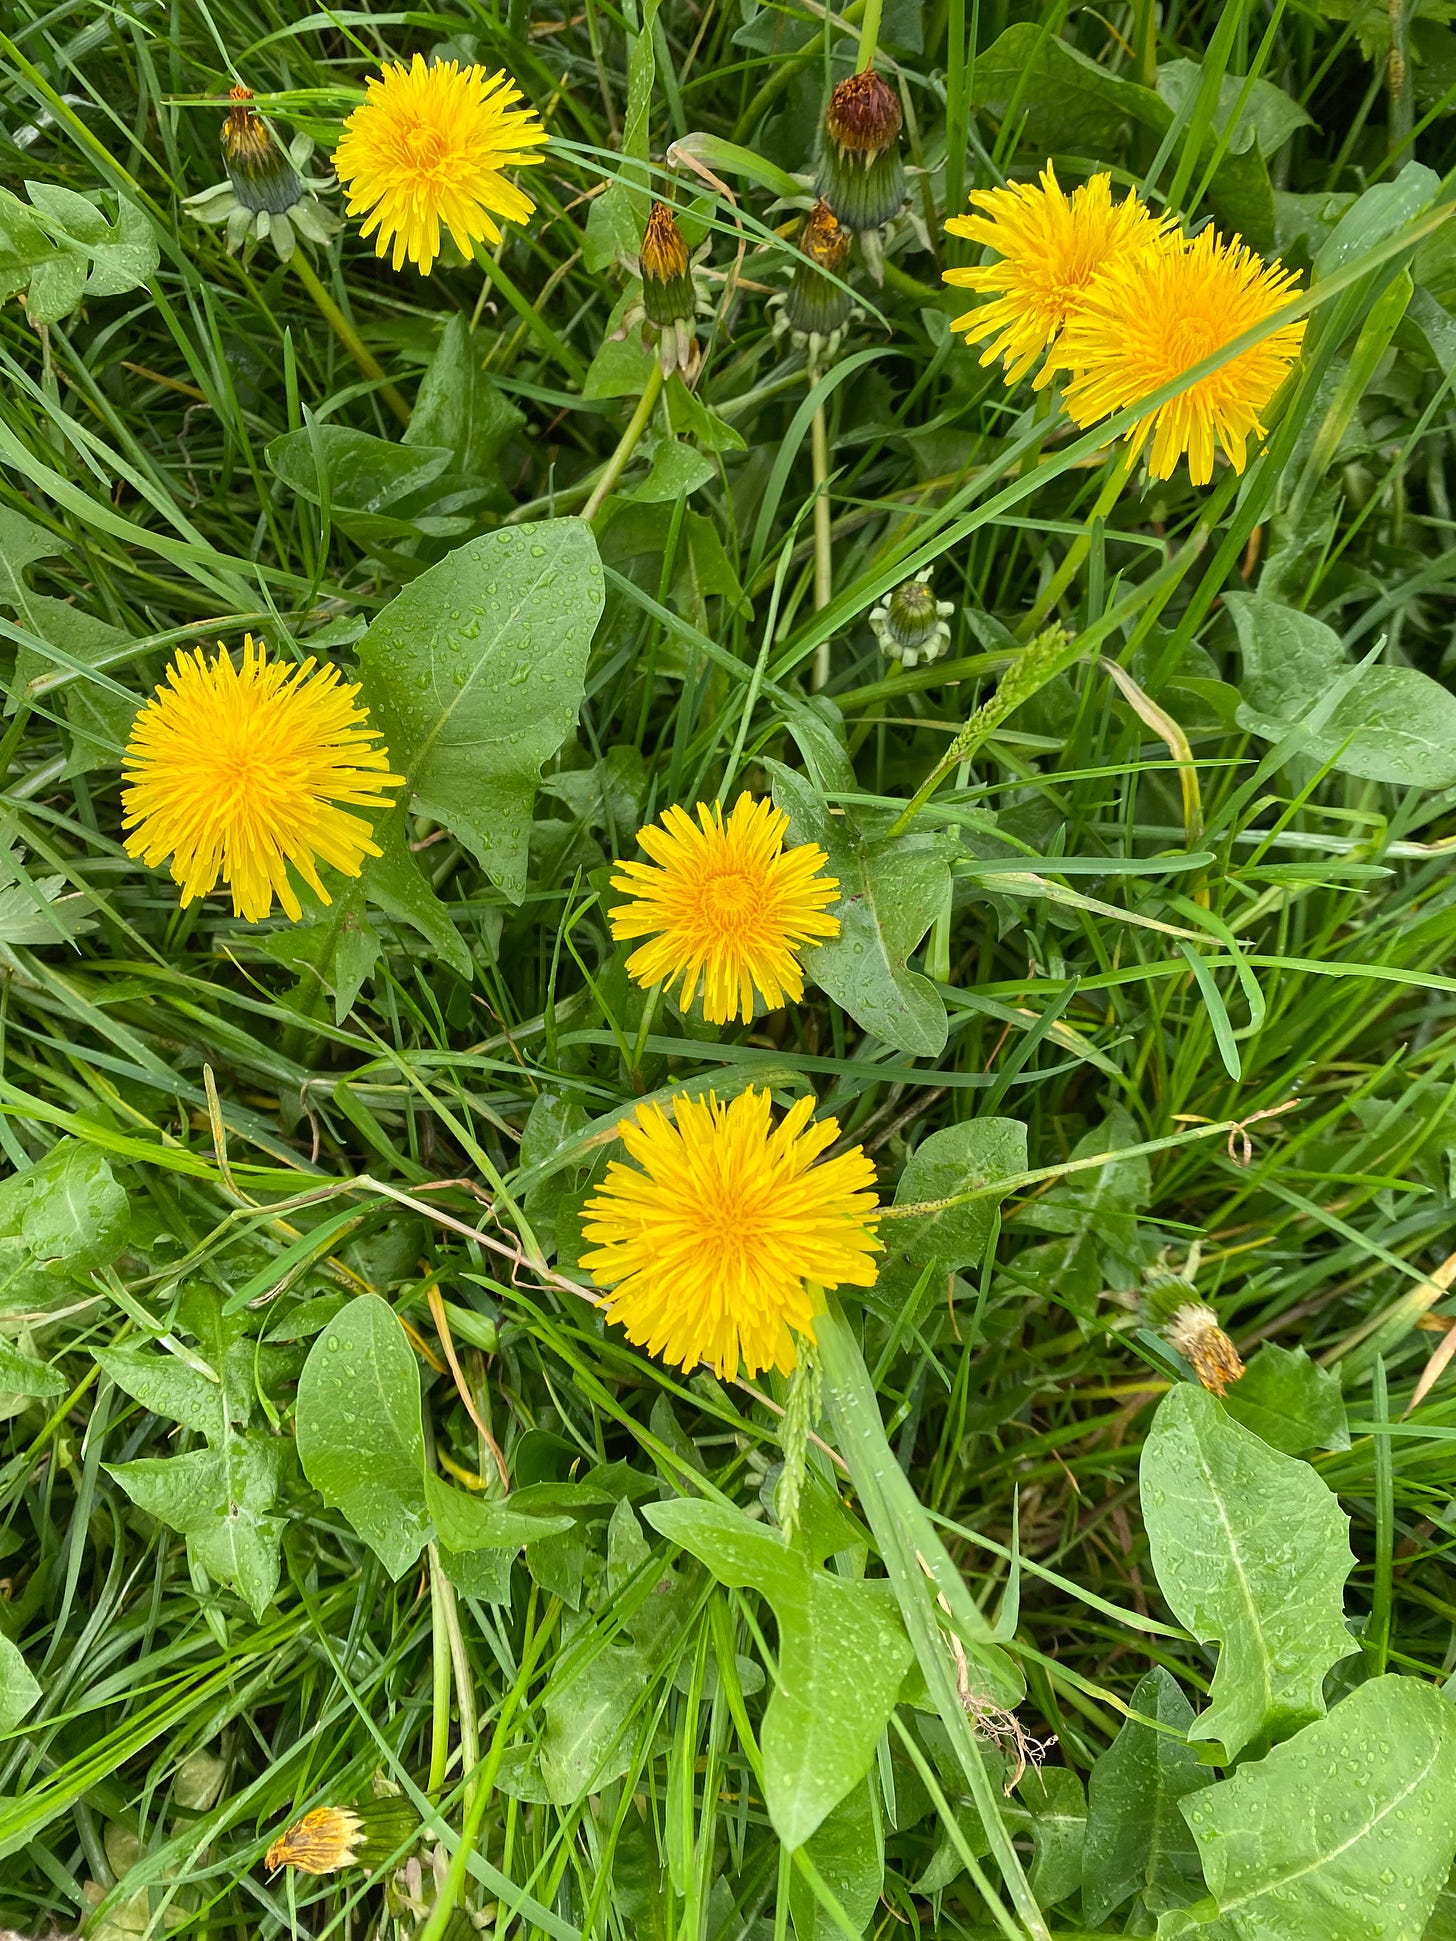 A close-up photo of a wild patch of green grasses and yellow dandelion flowers.